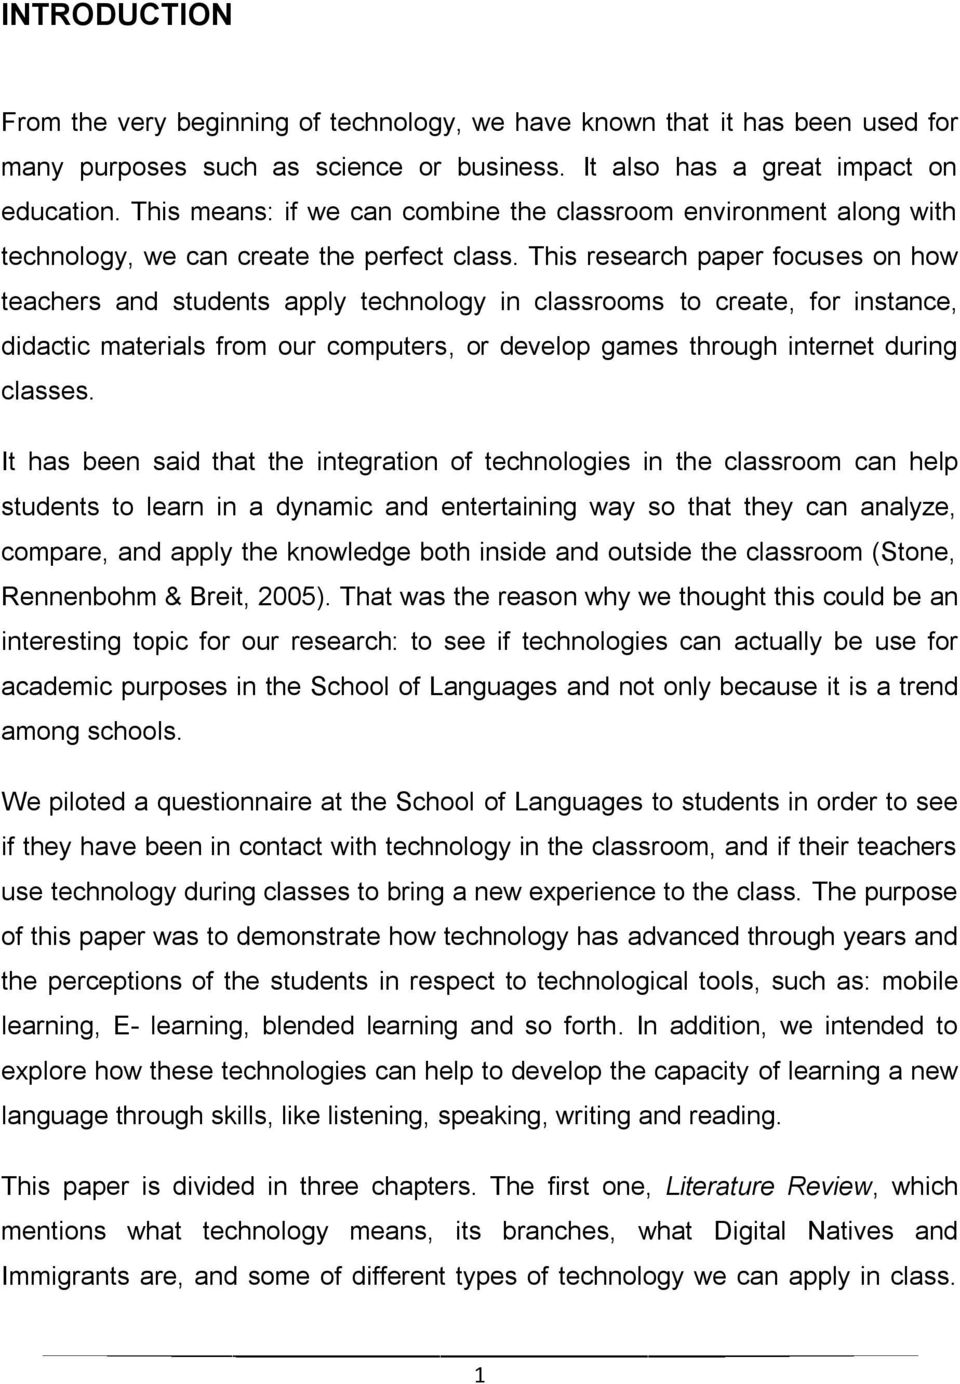 This research paper focuses on how teachers and students apply technology in classrooms to create, for instance, didactic materials from our computers, or develop games through internet during